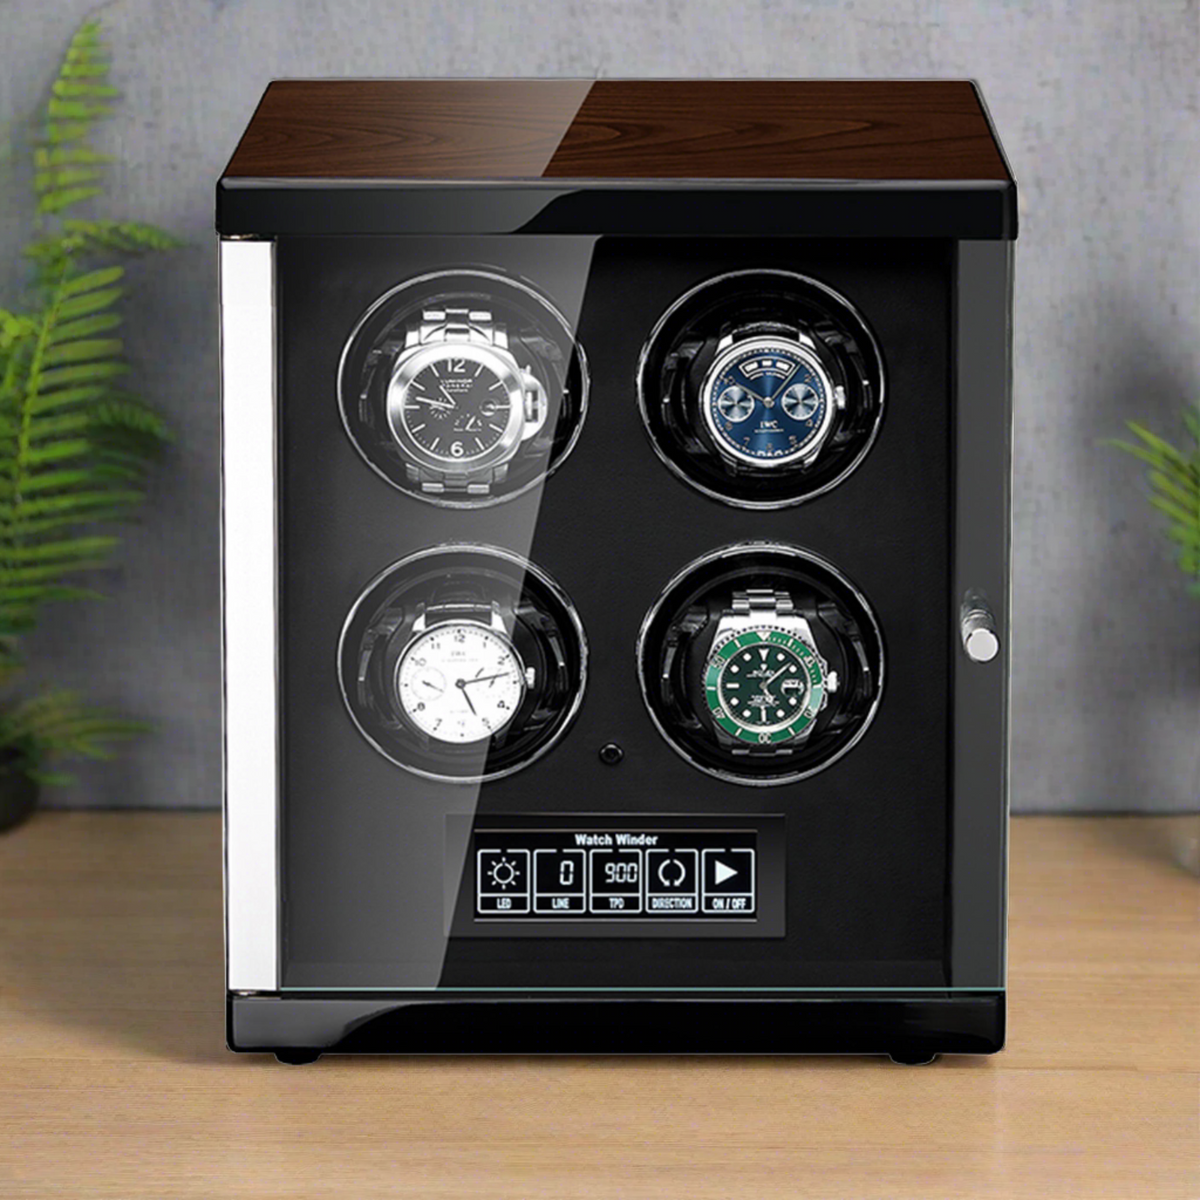 Tempus 4 Watch Winder for Automatic Watches with Touch Screen Technology by Tempus